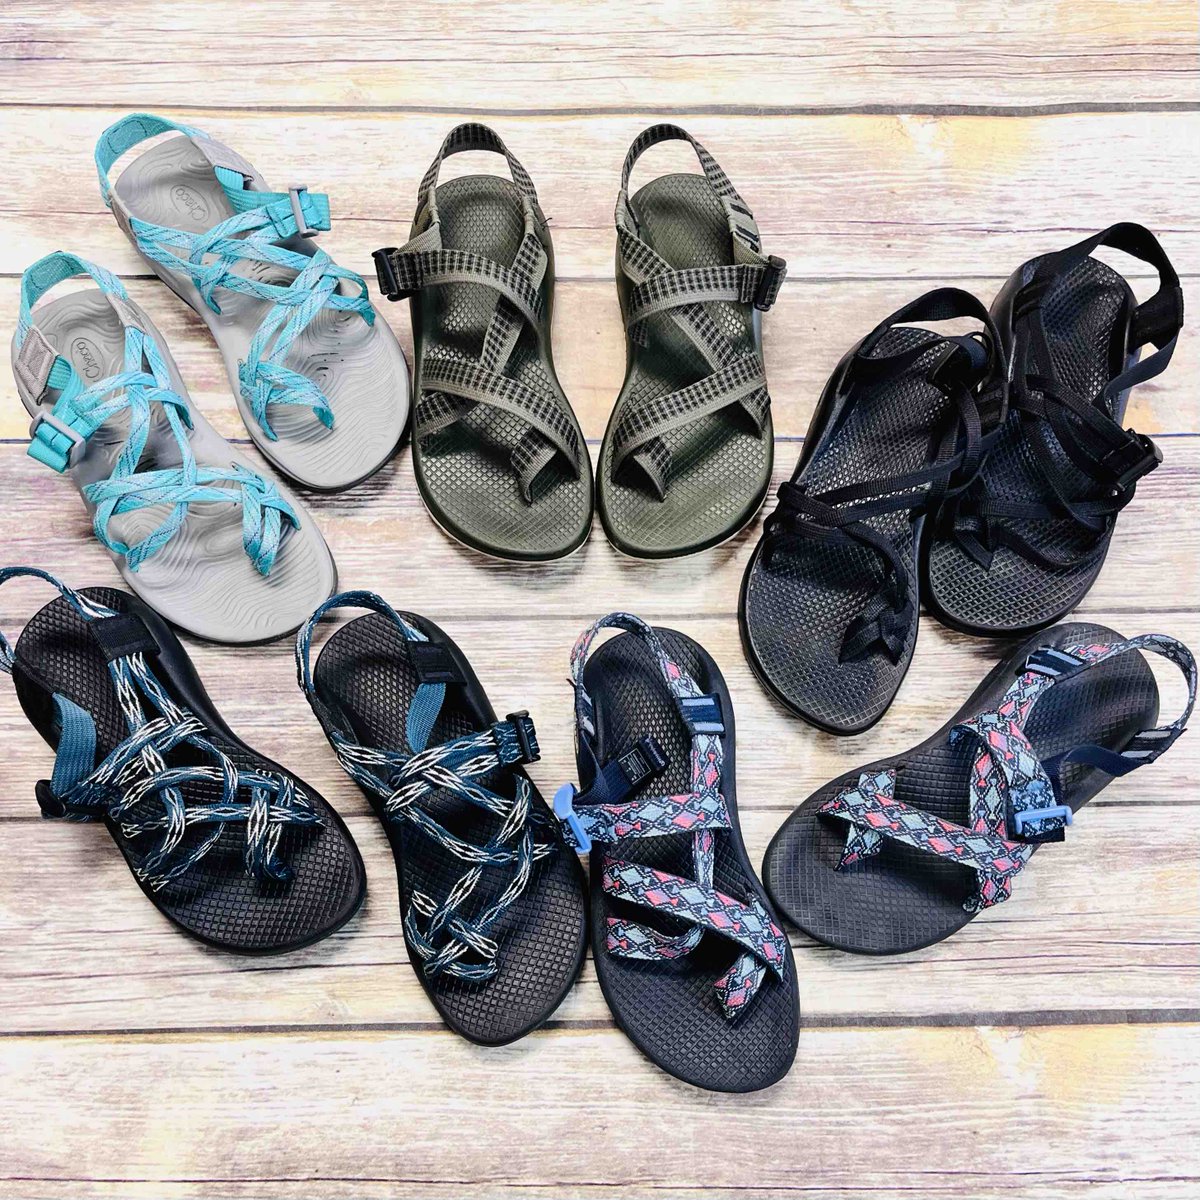 Get ready for summer with us! We have so many cute sandals on the floor 😊
———
#gentlyused #platoscloset #thriftedfashion #thriftedootd #brandsforless #outfitinspiration #outfitoftheday